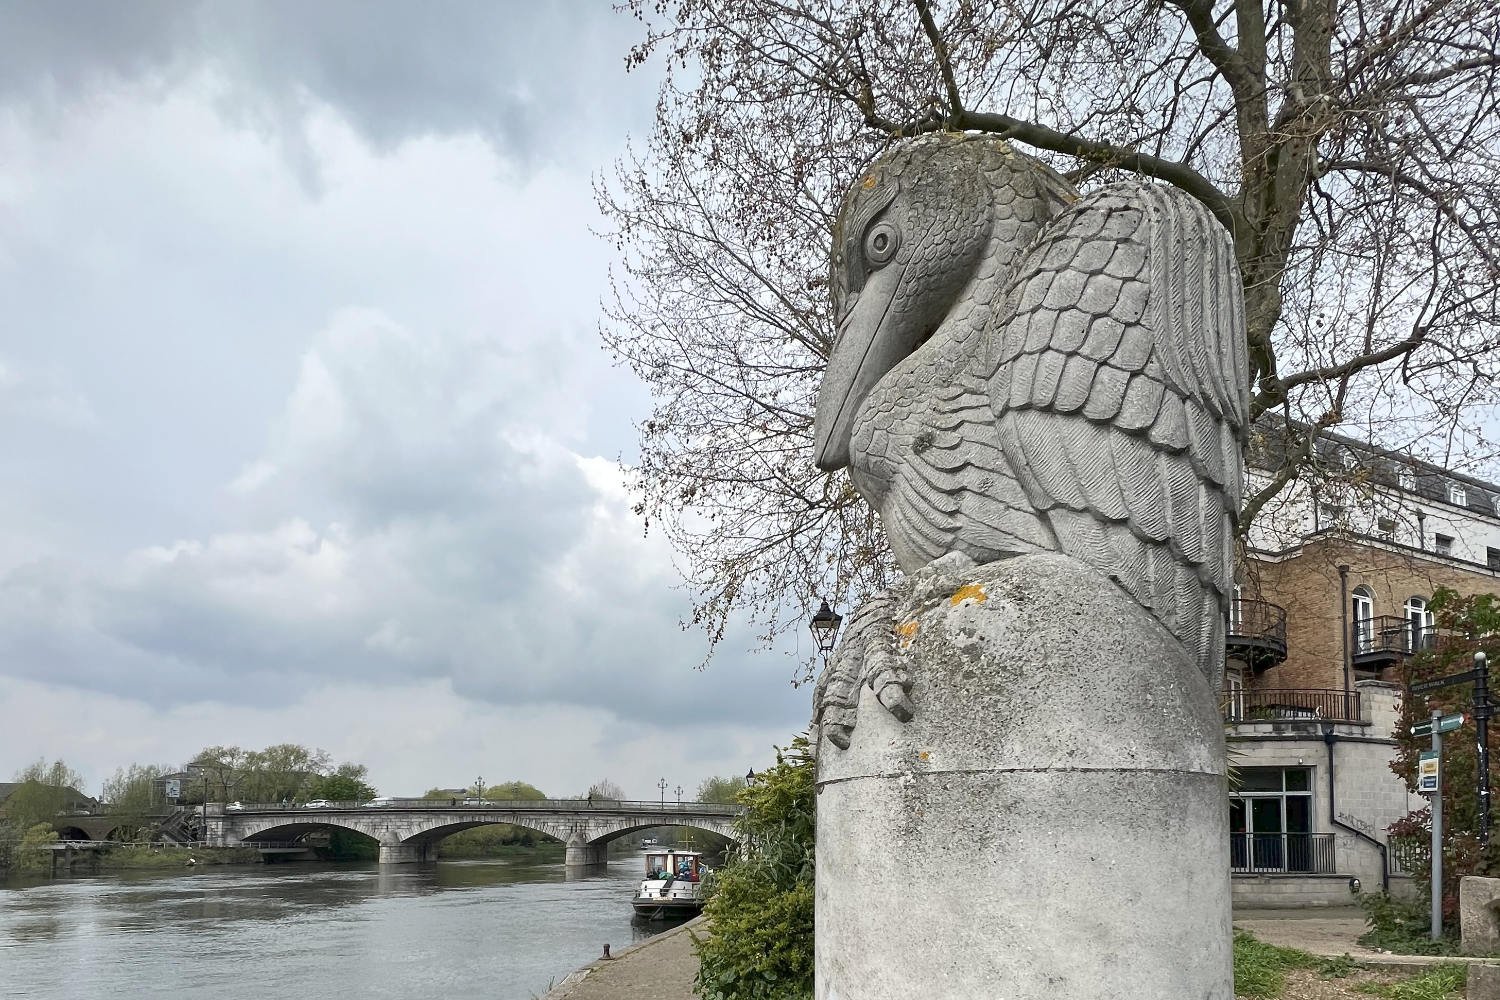 The River Guardian, by Simon Buchannan at the confluence of the Colne and Thames